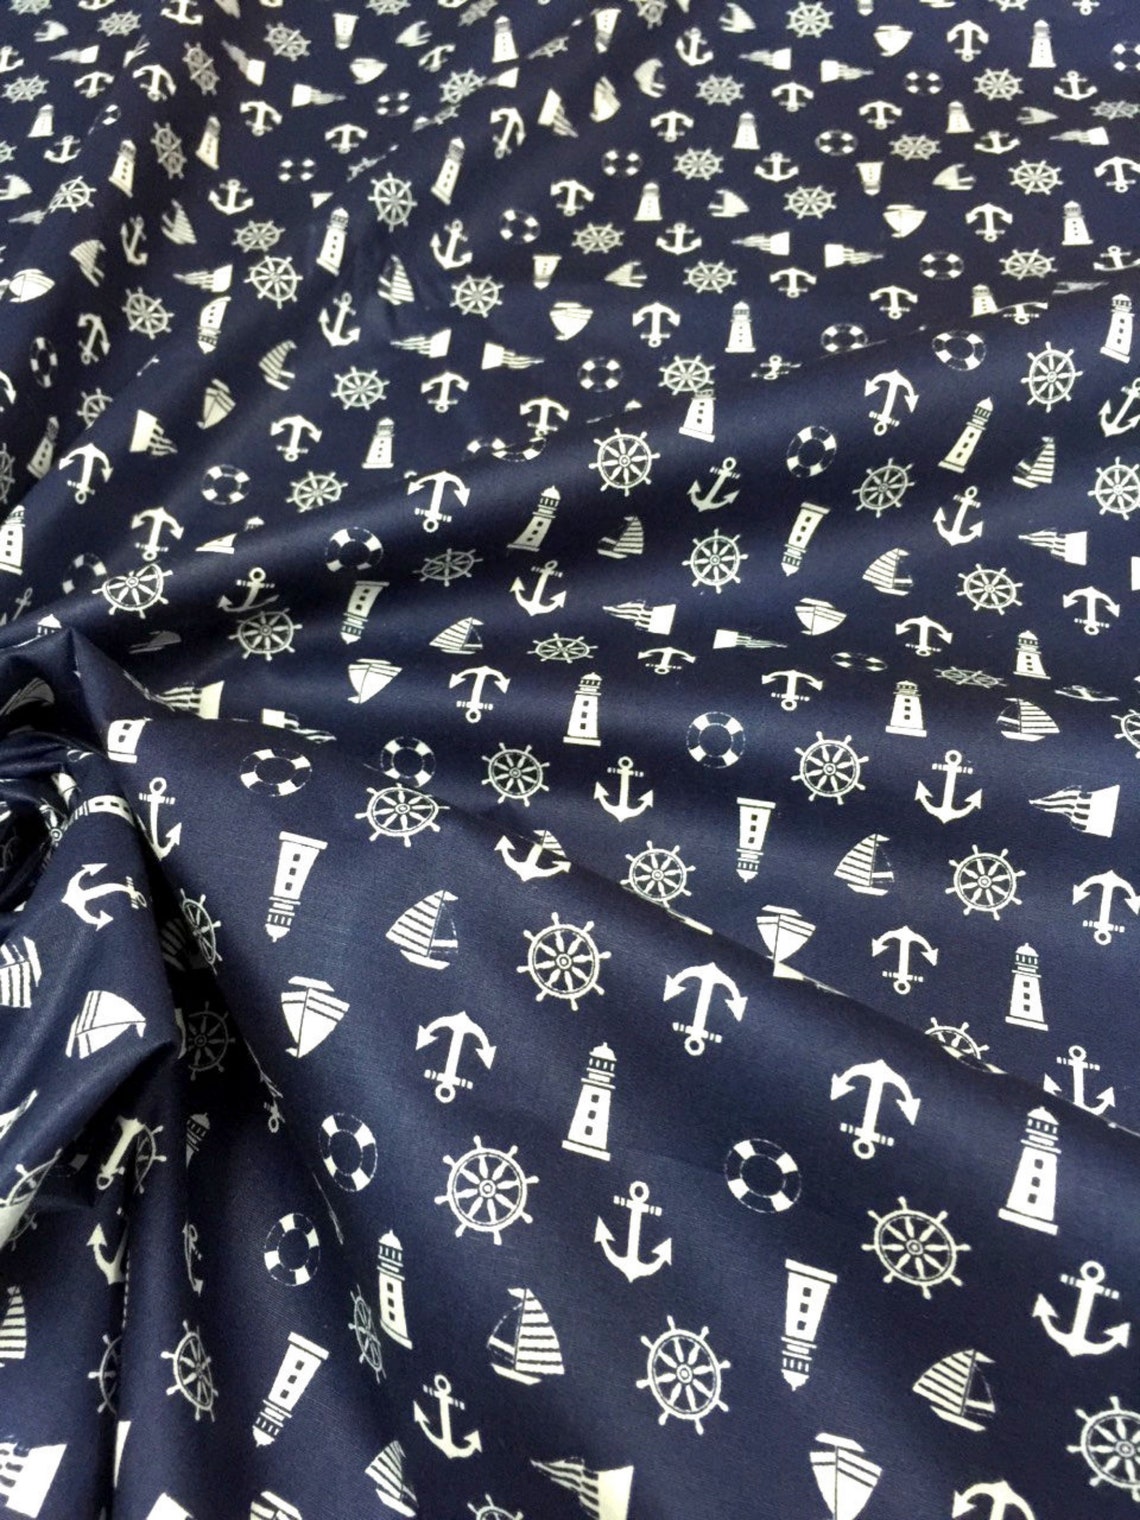 Nautical 100% Cotton Navy Blue Print Fabric 44W Material BTY | Etsy